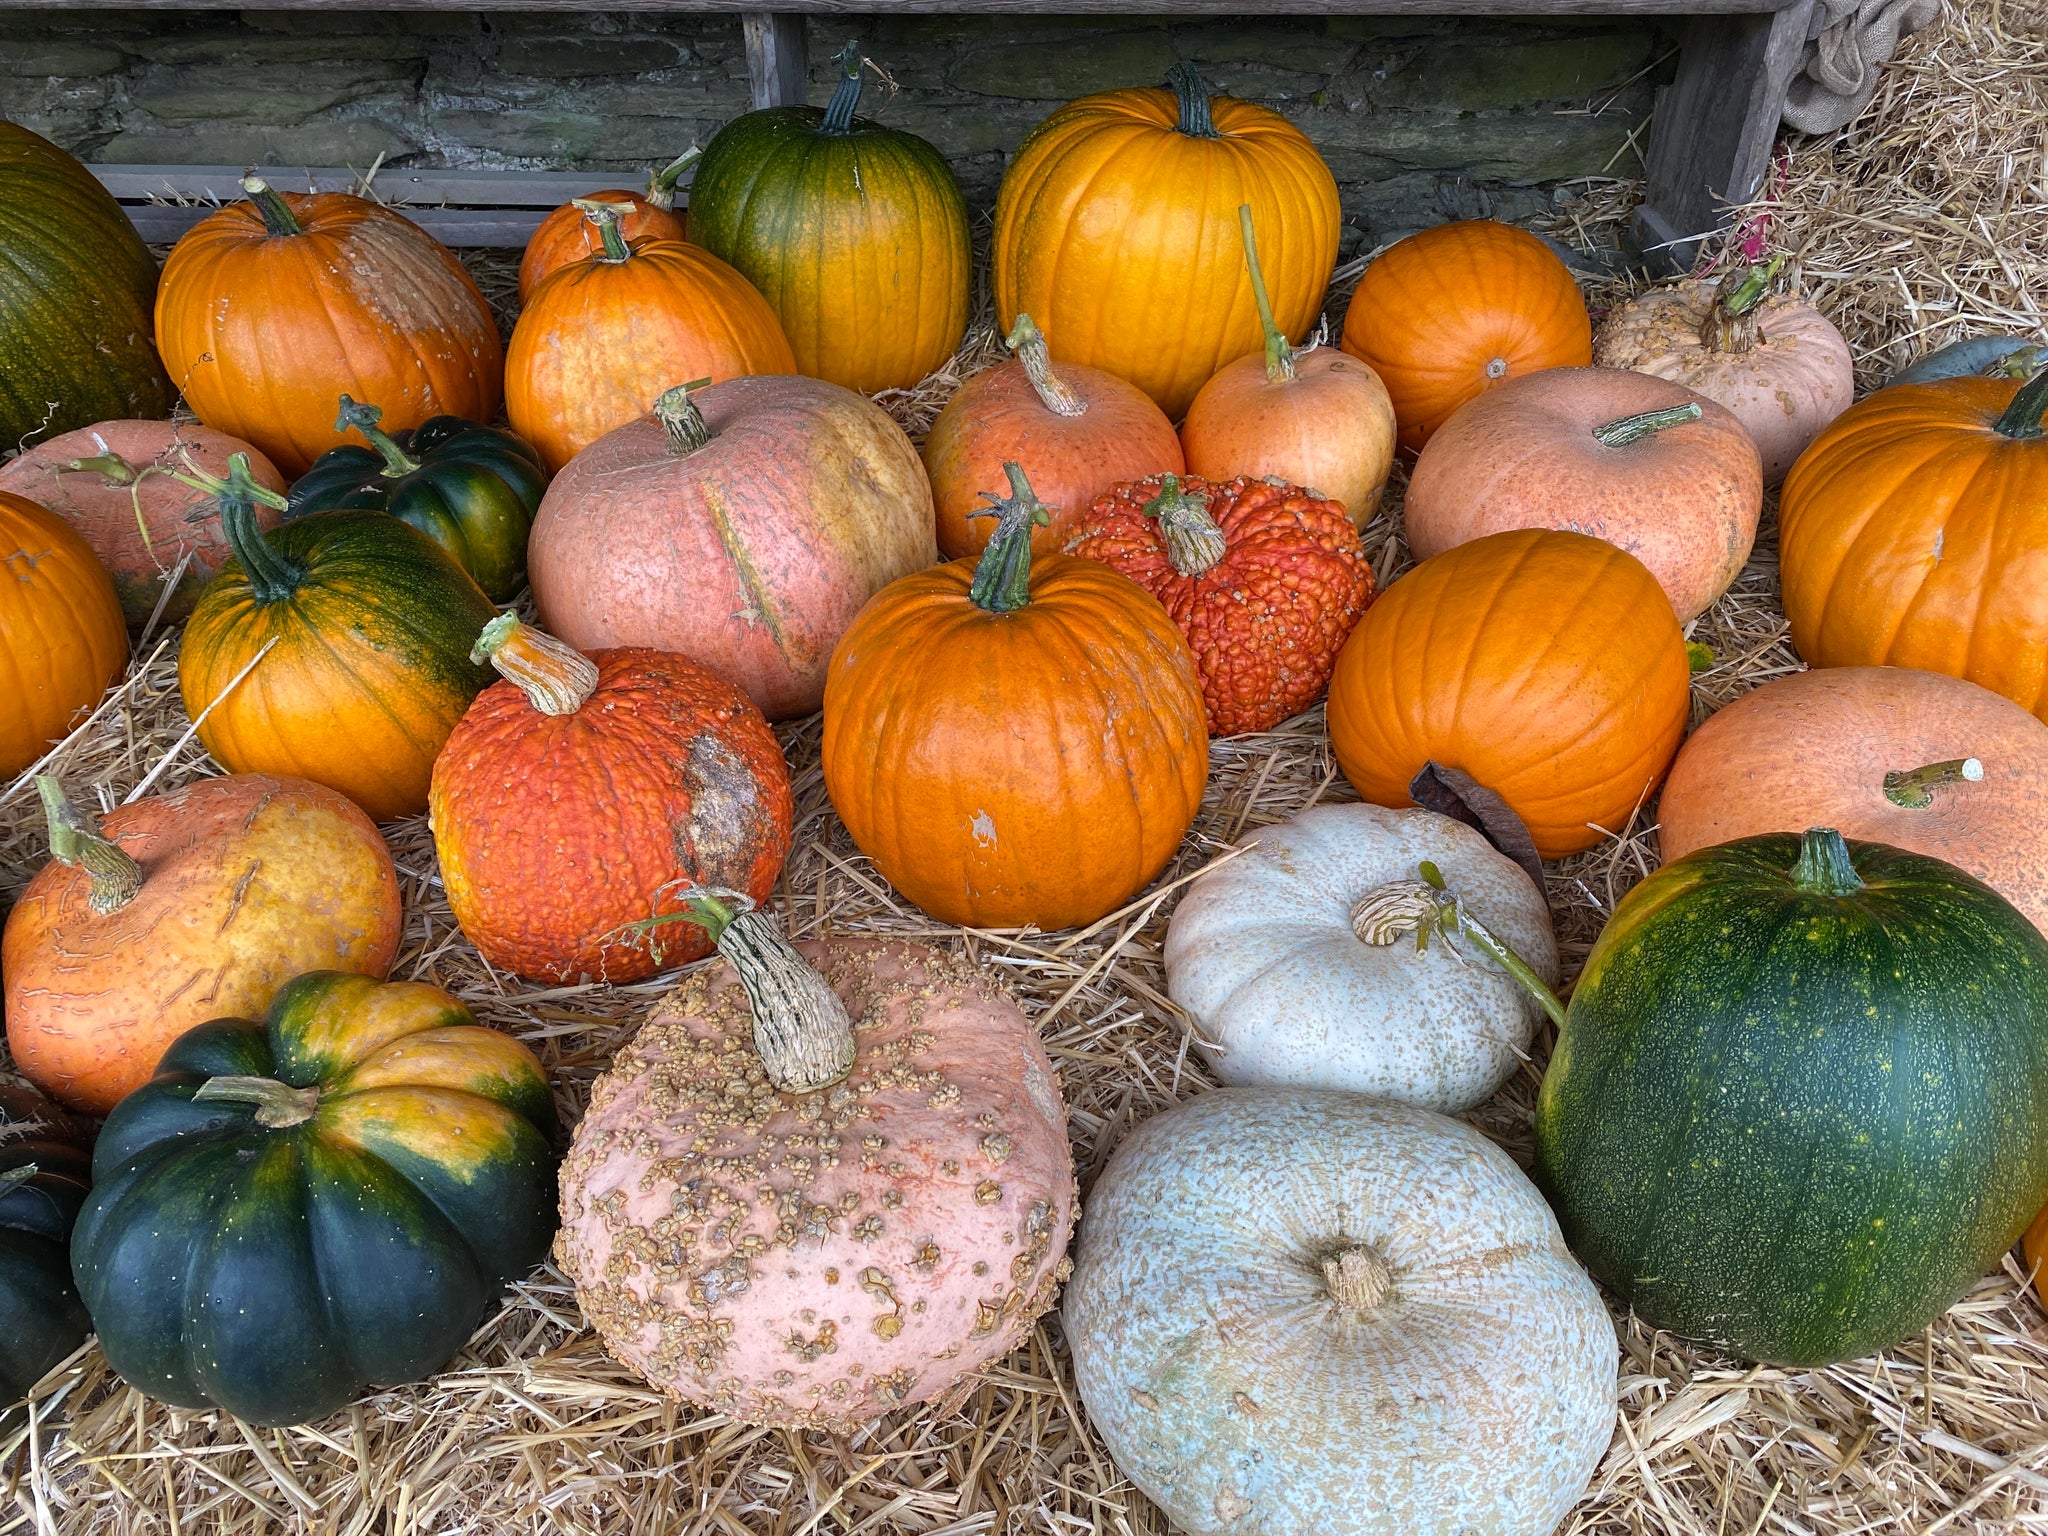 Pumpkins and squashes curing on a bed of straw